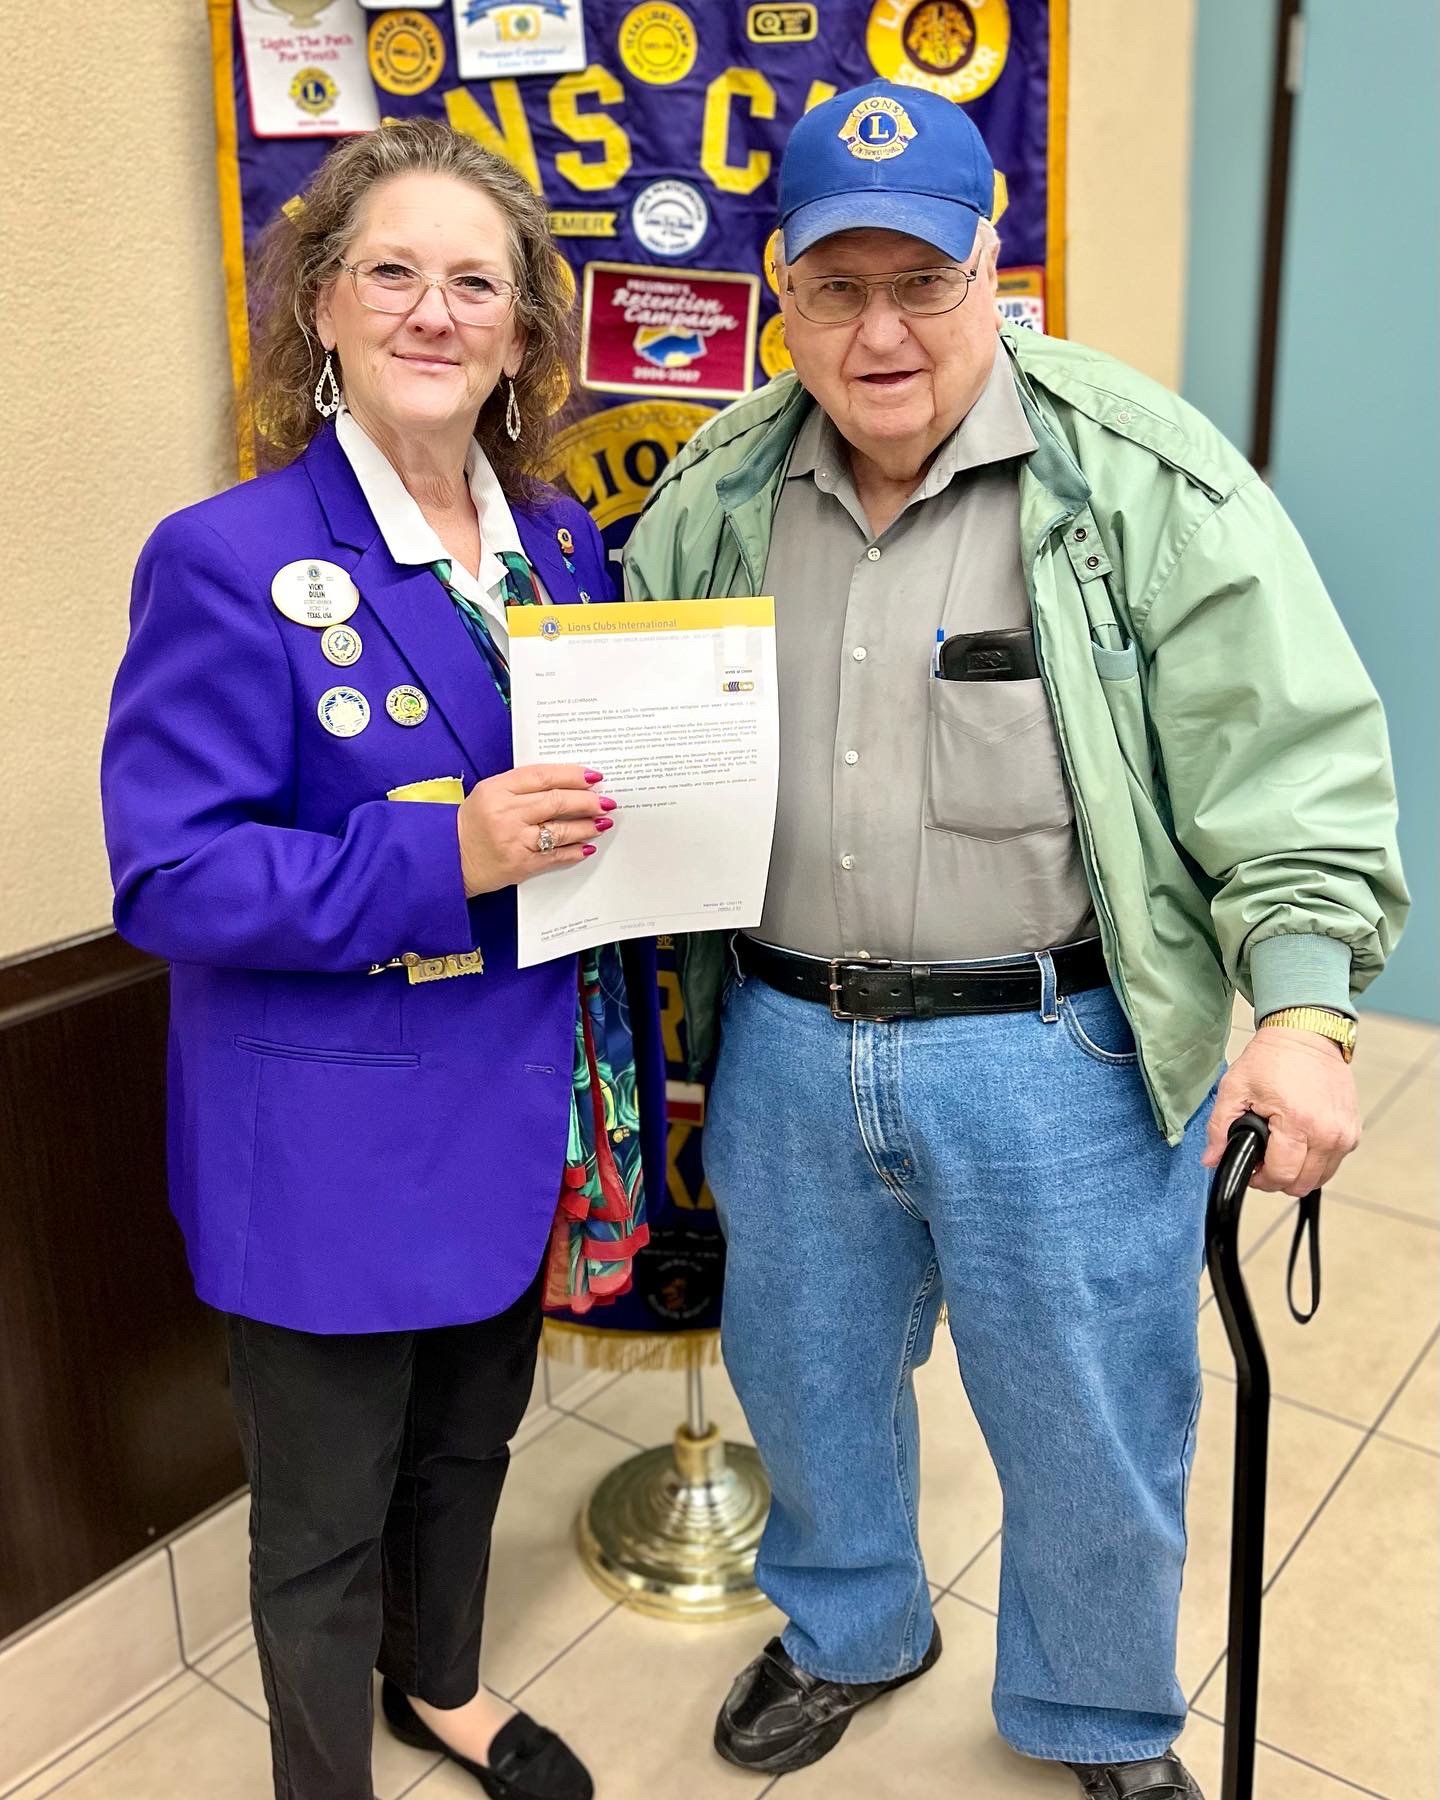 District Gov Vicki Dulin presents Lion Ray with 40 year Chevron award in front of the Sugar Land Lions Club Banner.